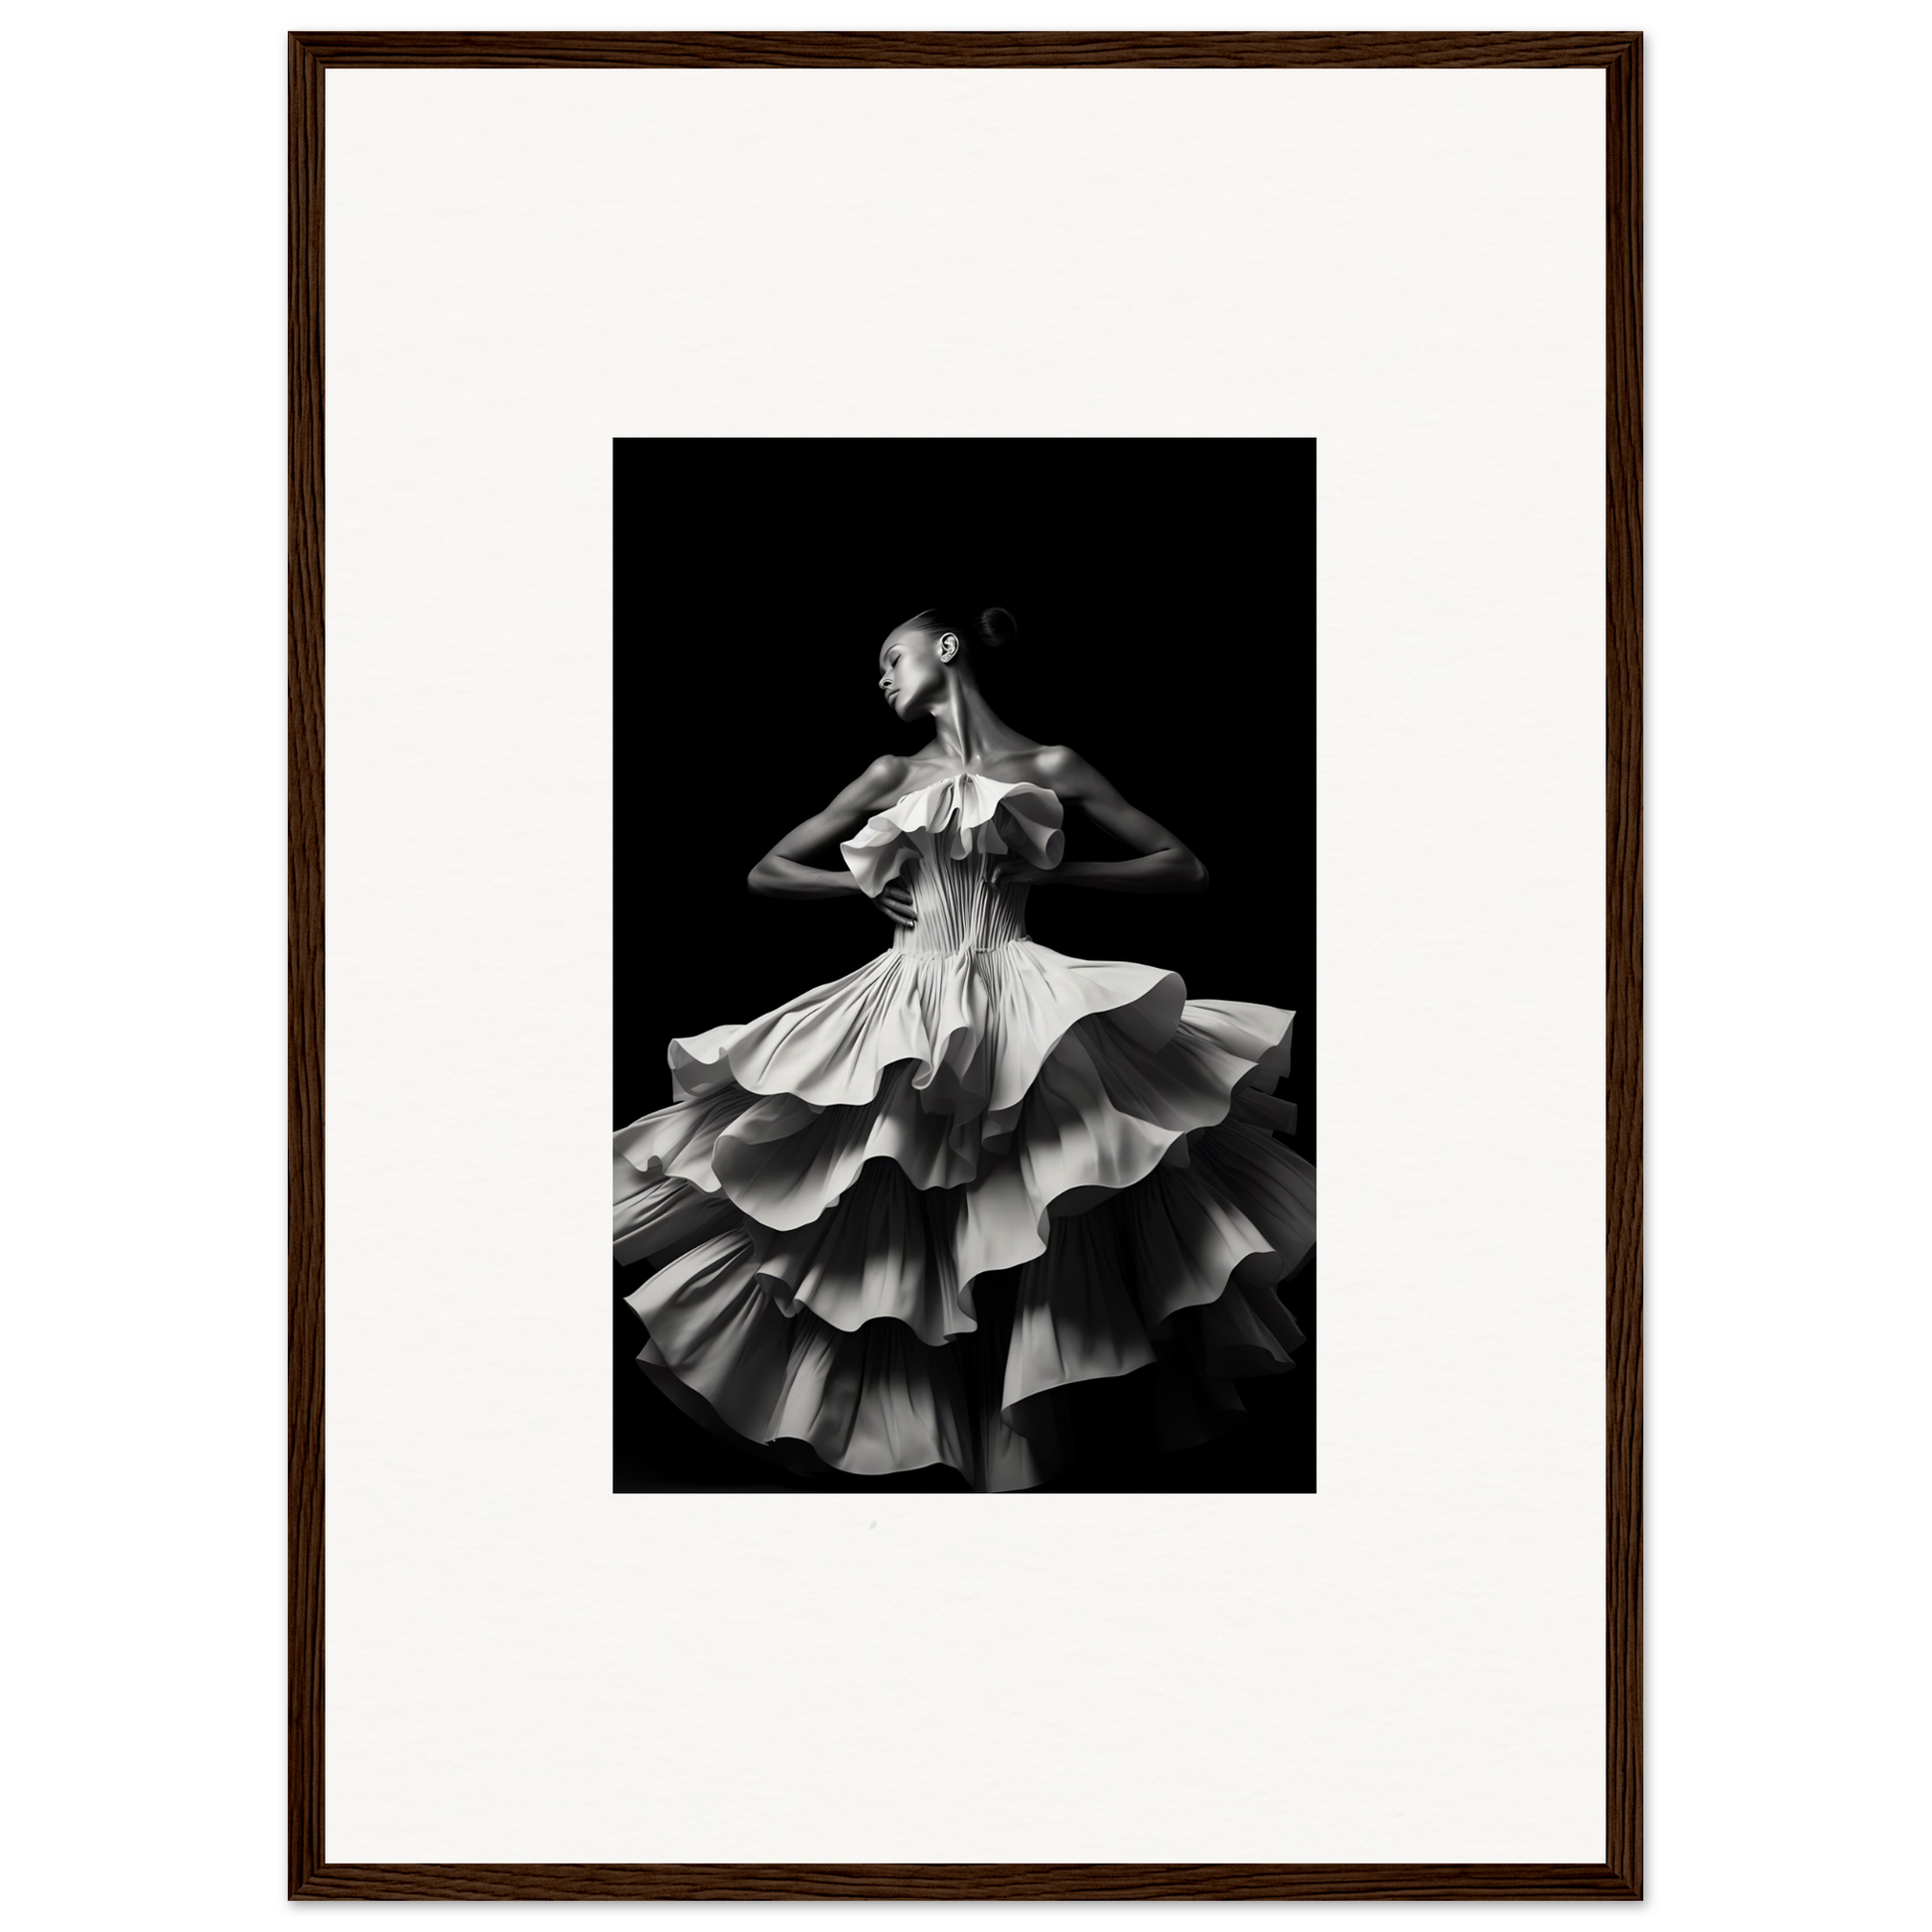 Dancers and time a2 - framed poster - 50x70 cm / 20x28″ /